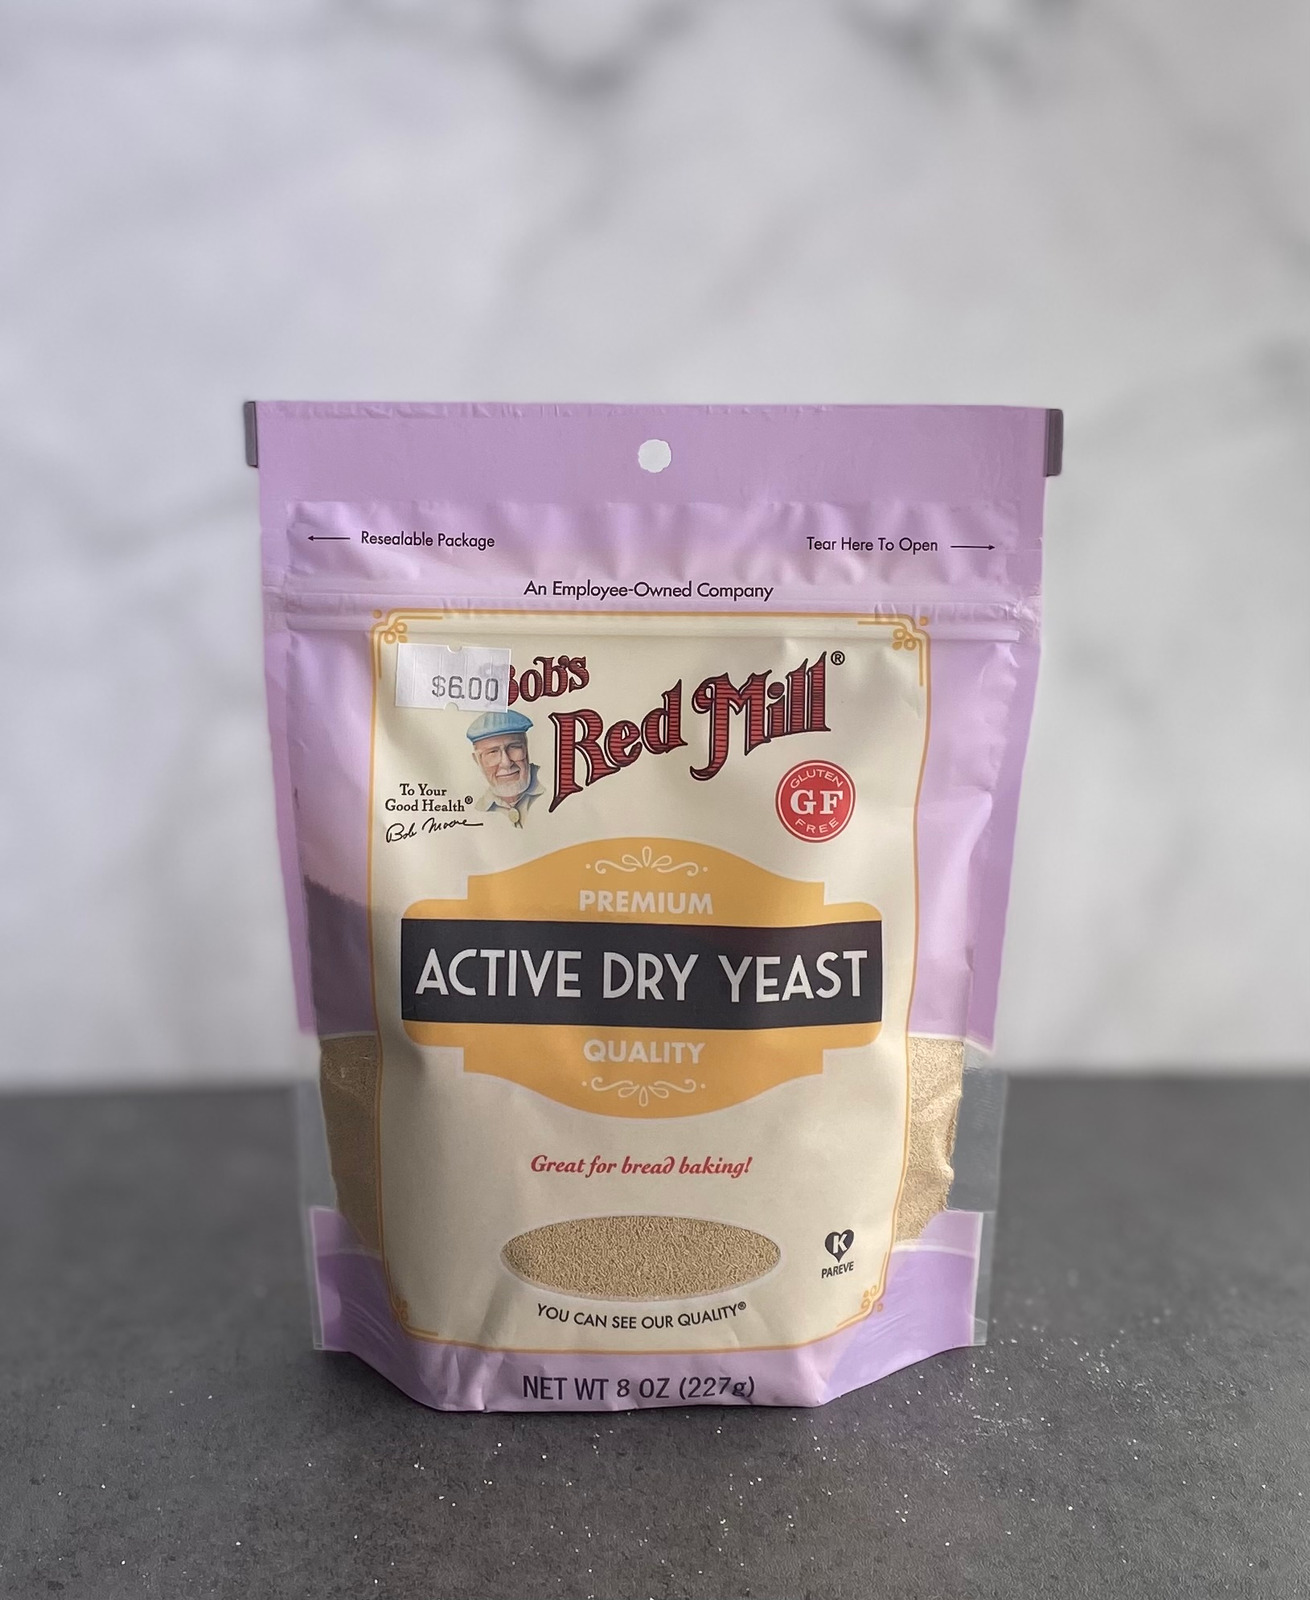 Bob's Red Mill Gluten Free Active Dry Yeast, 08 Oz – with CMC Products